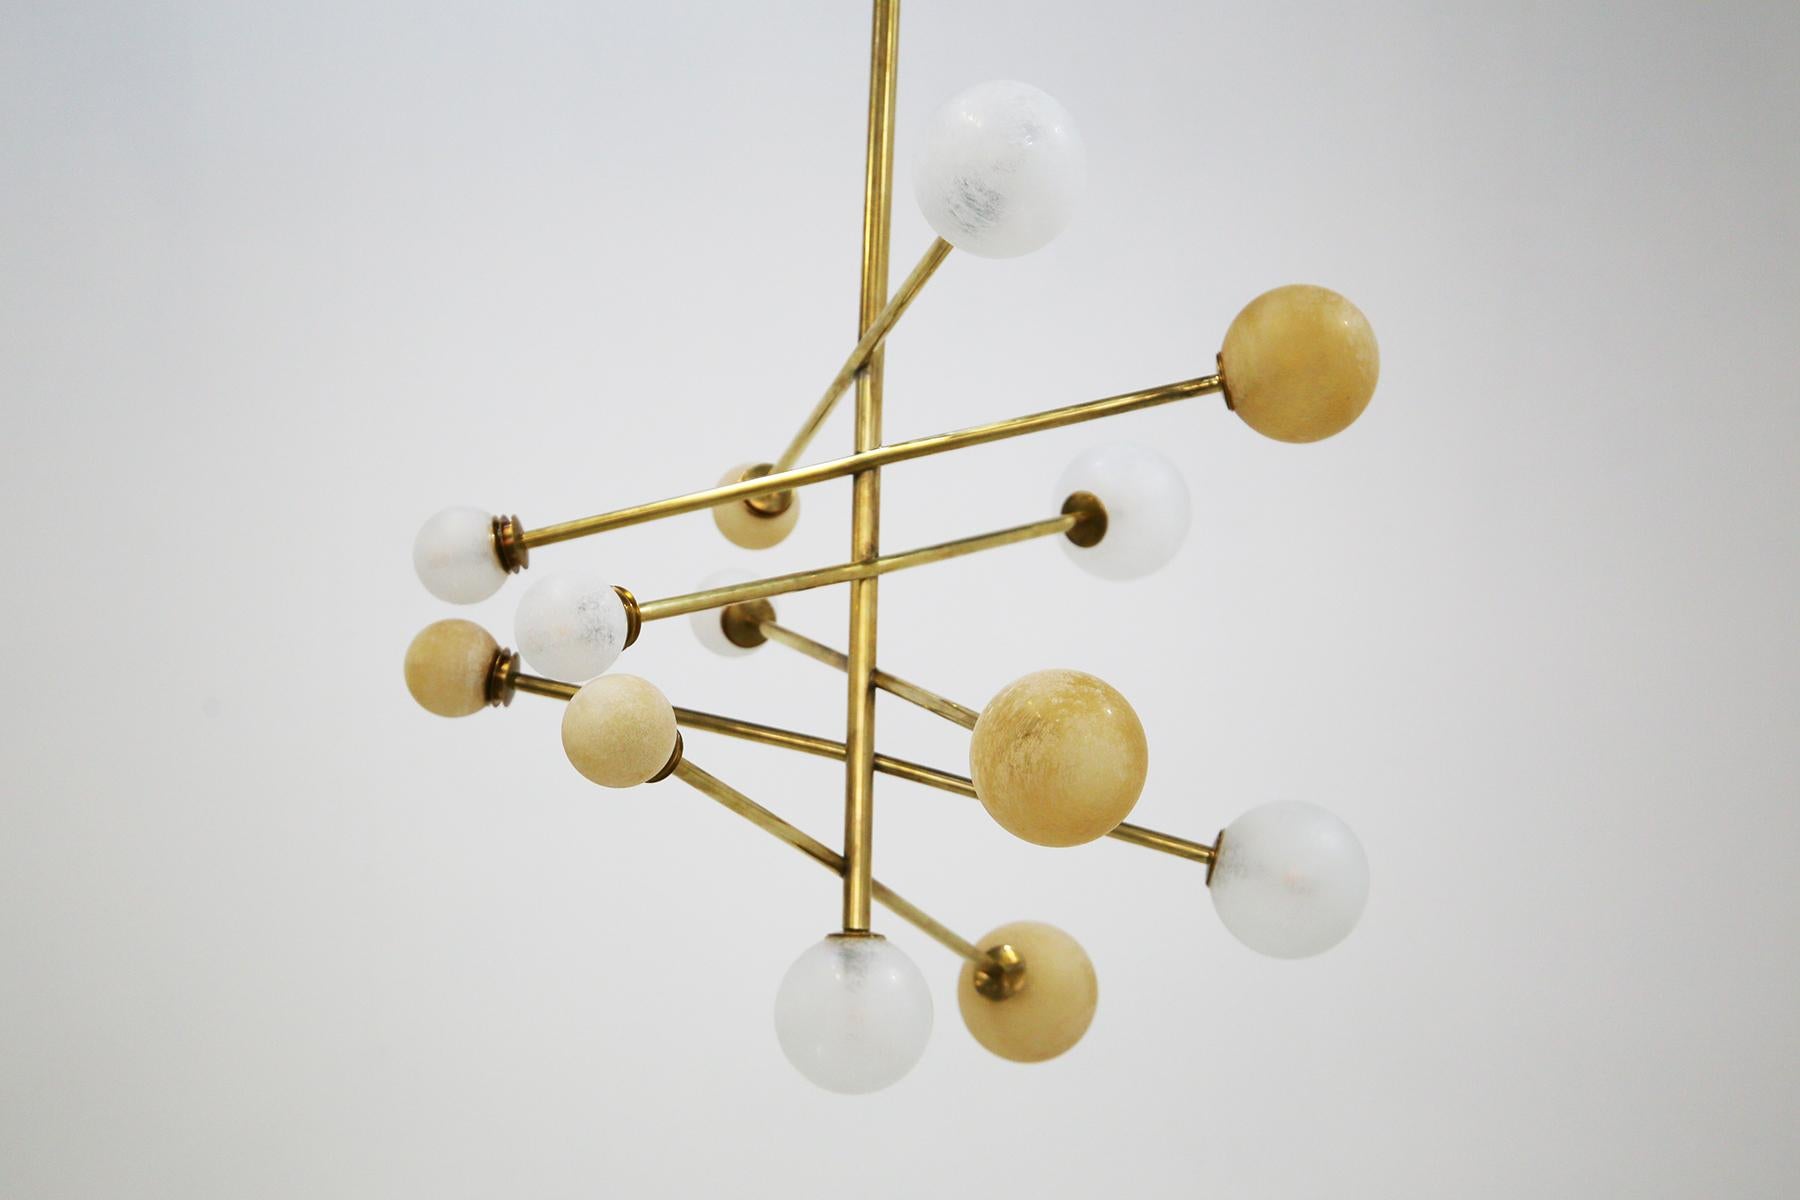 Imagine being enveloped in the enchanting light of an elegant chandelier, the Lunare model, a jewel of Italian design created in 2018. This chandelier features a tubular brass frame, its splendor shining not only because of its fine material, but